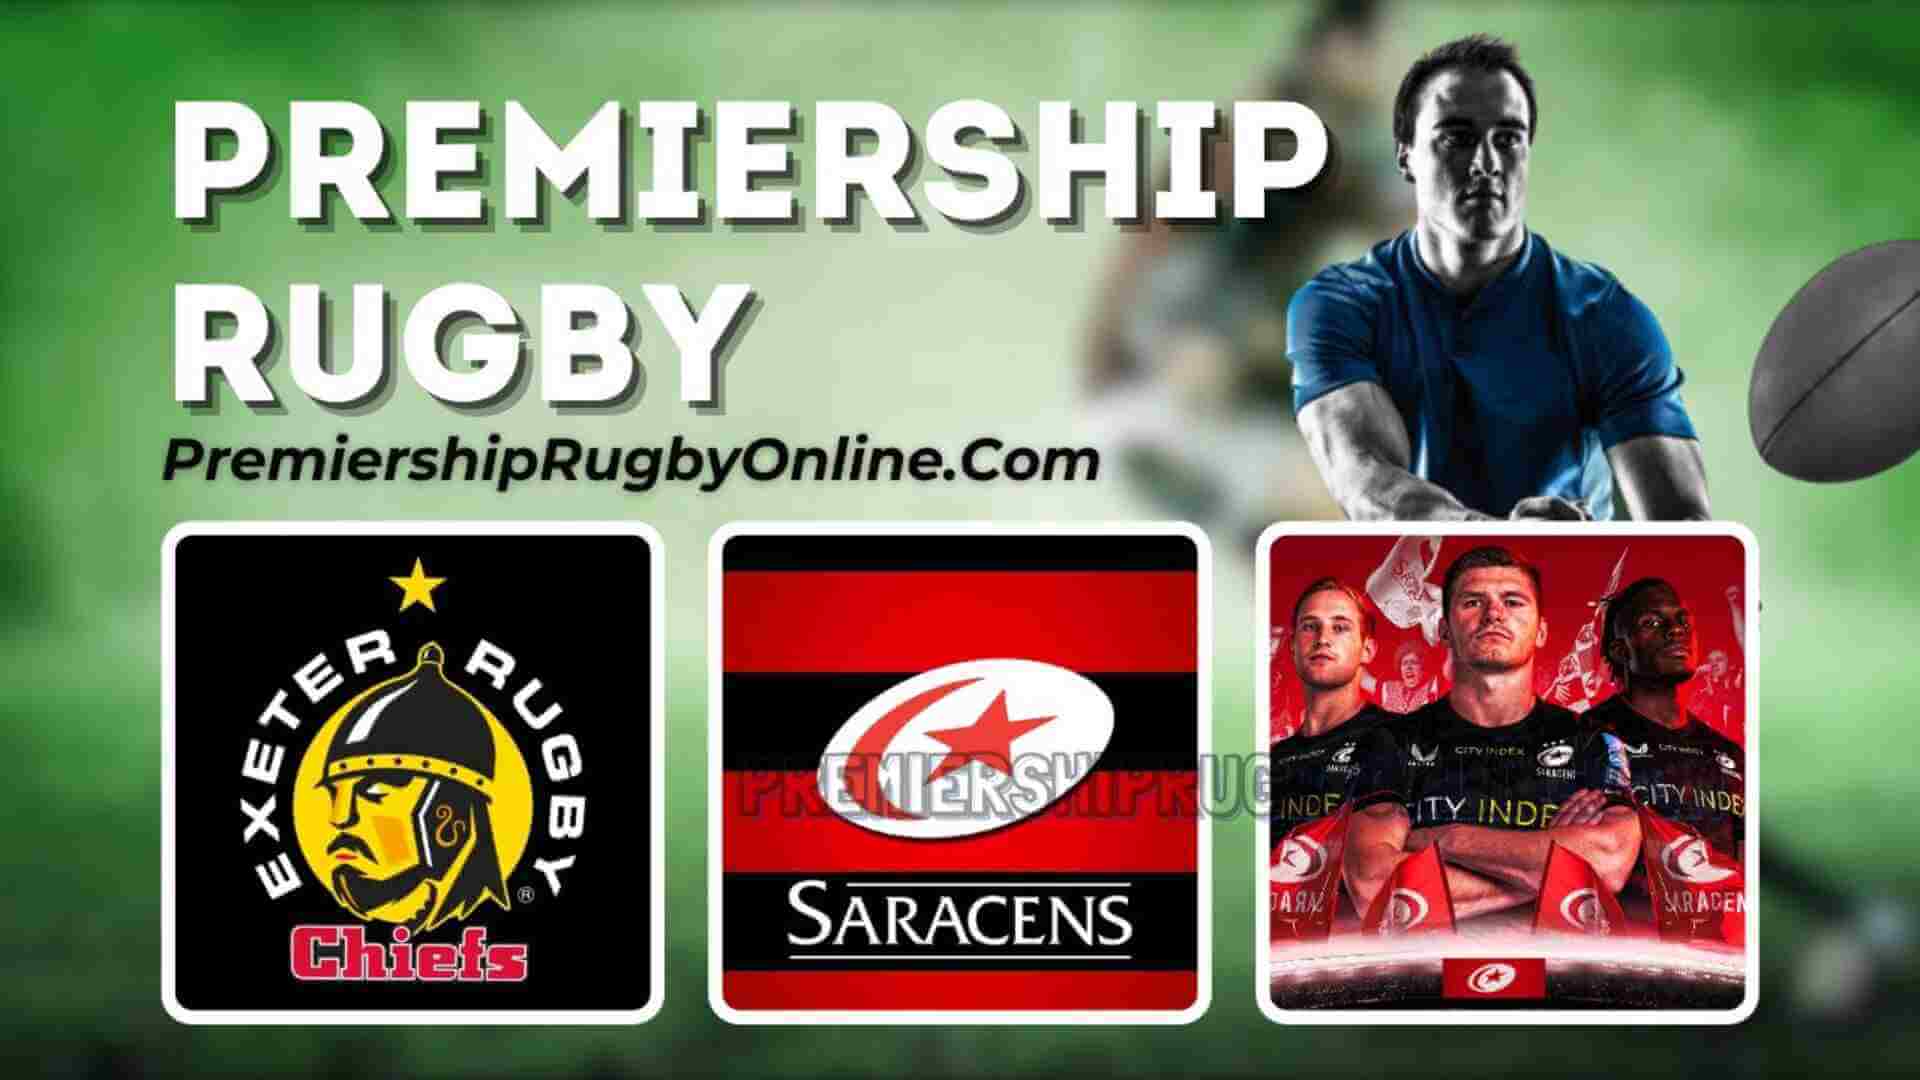 2018-saracens-vs-exeter-chiefs-rugby-live